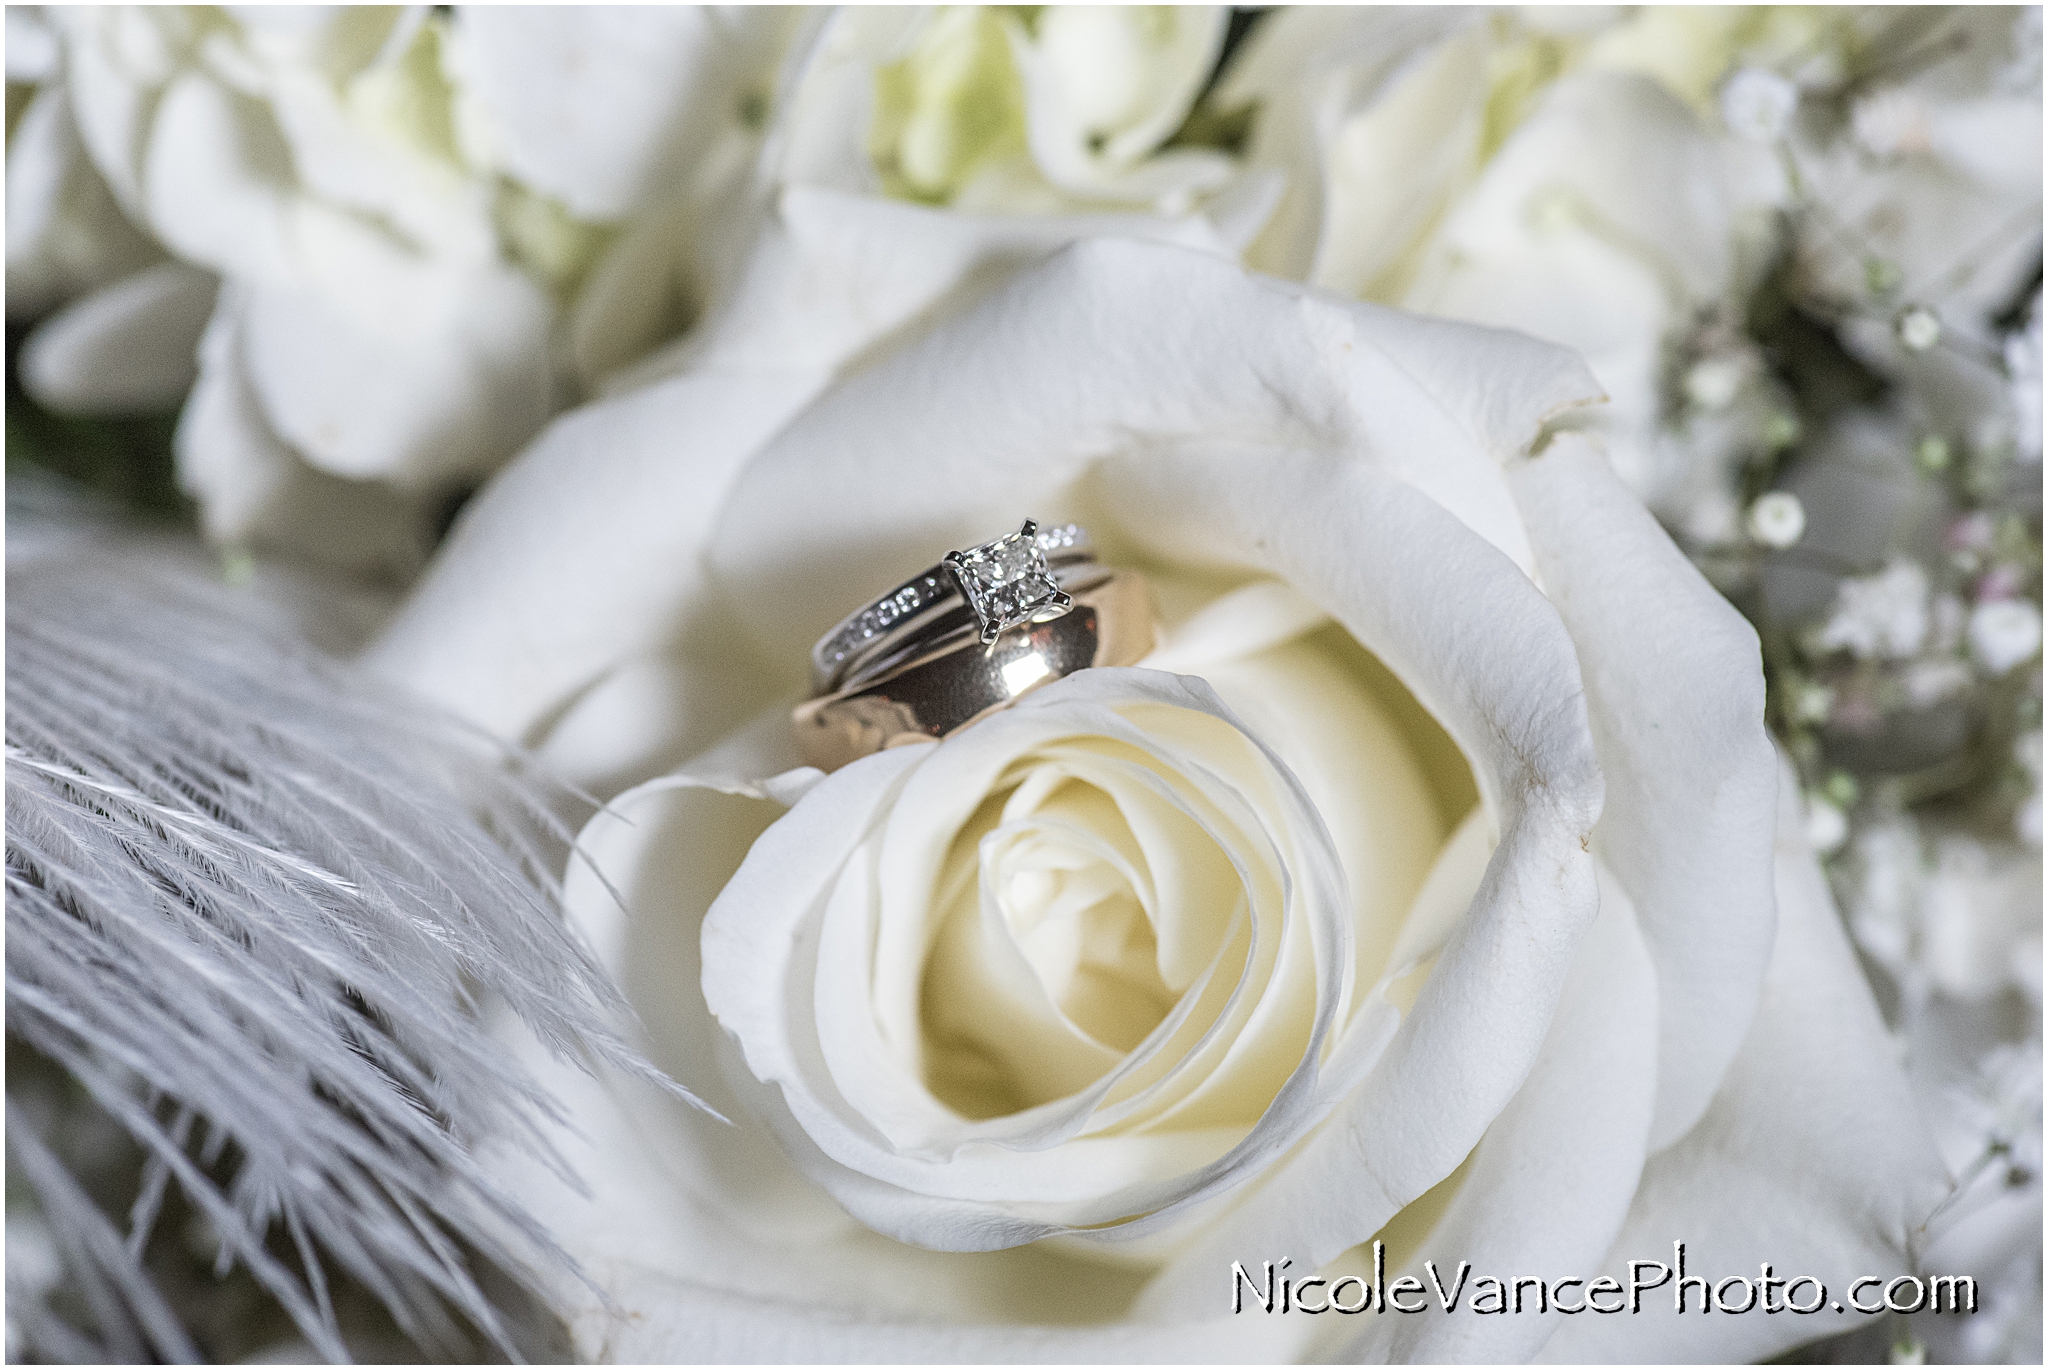 Wedding rings displayed in a centerpiece, inside a rose.